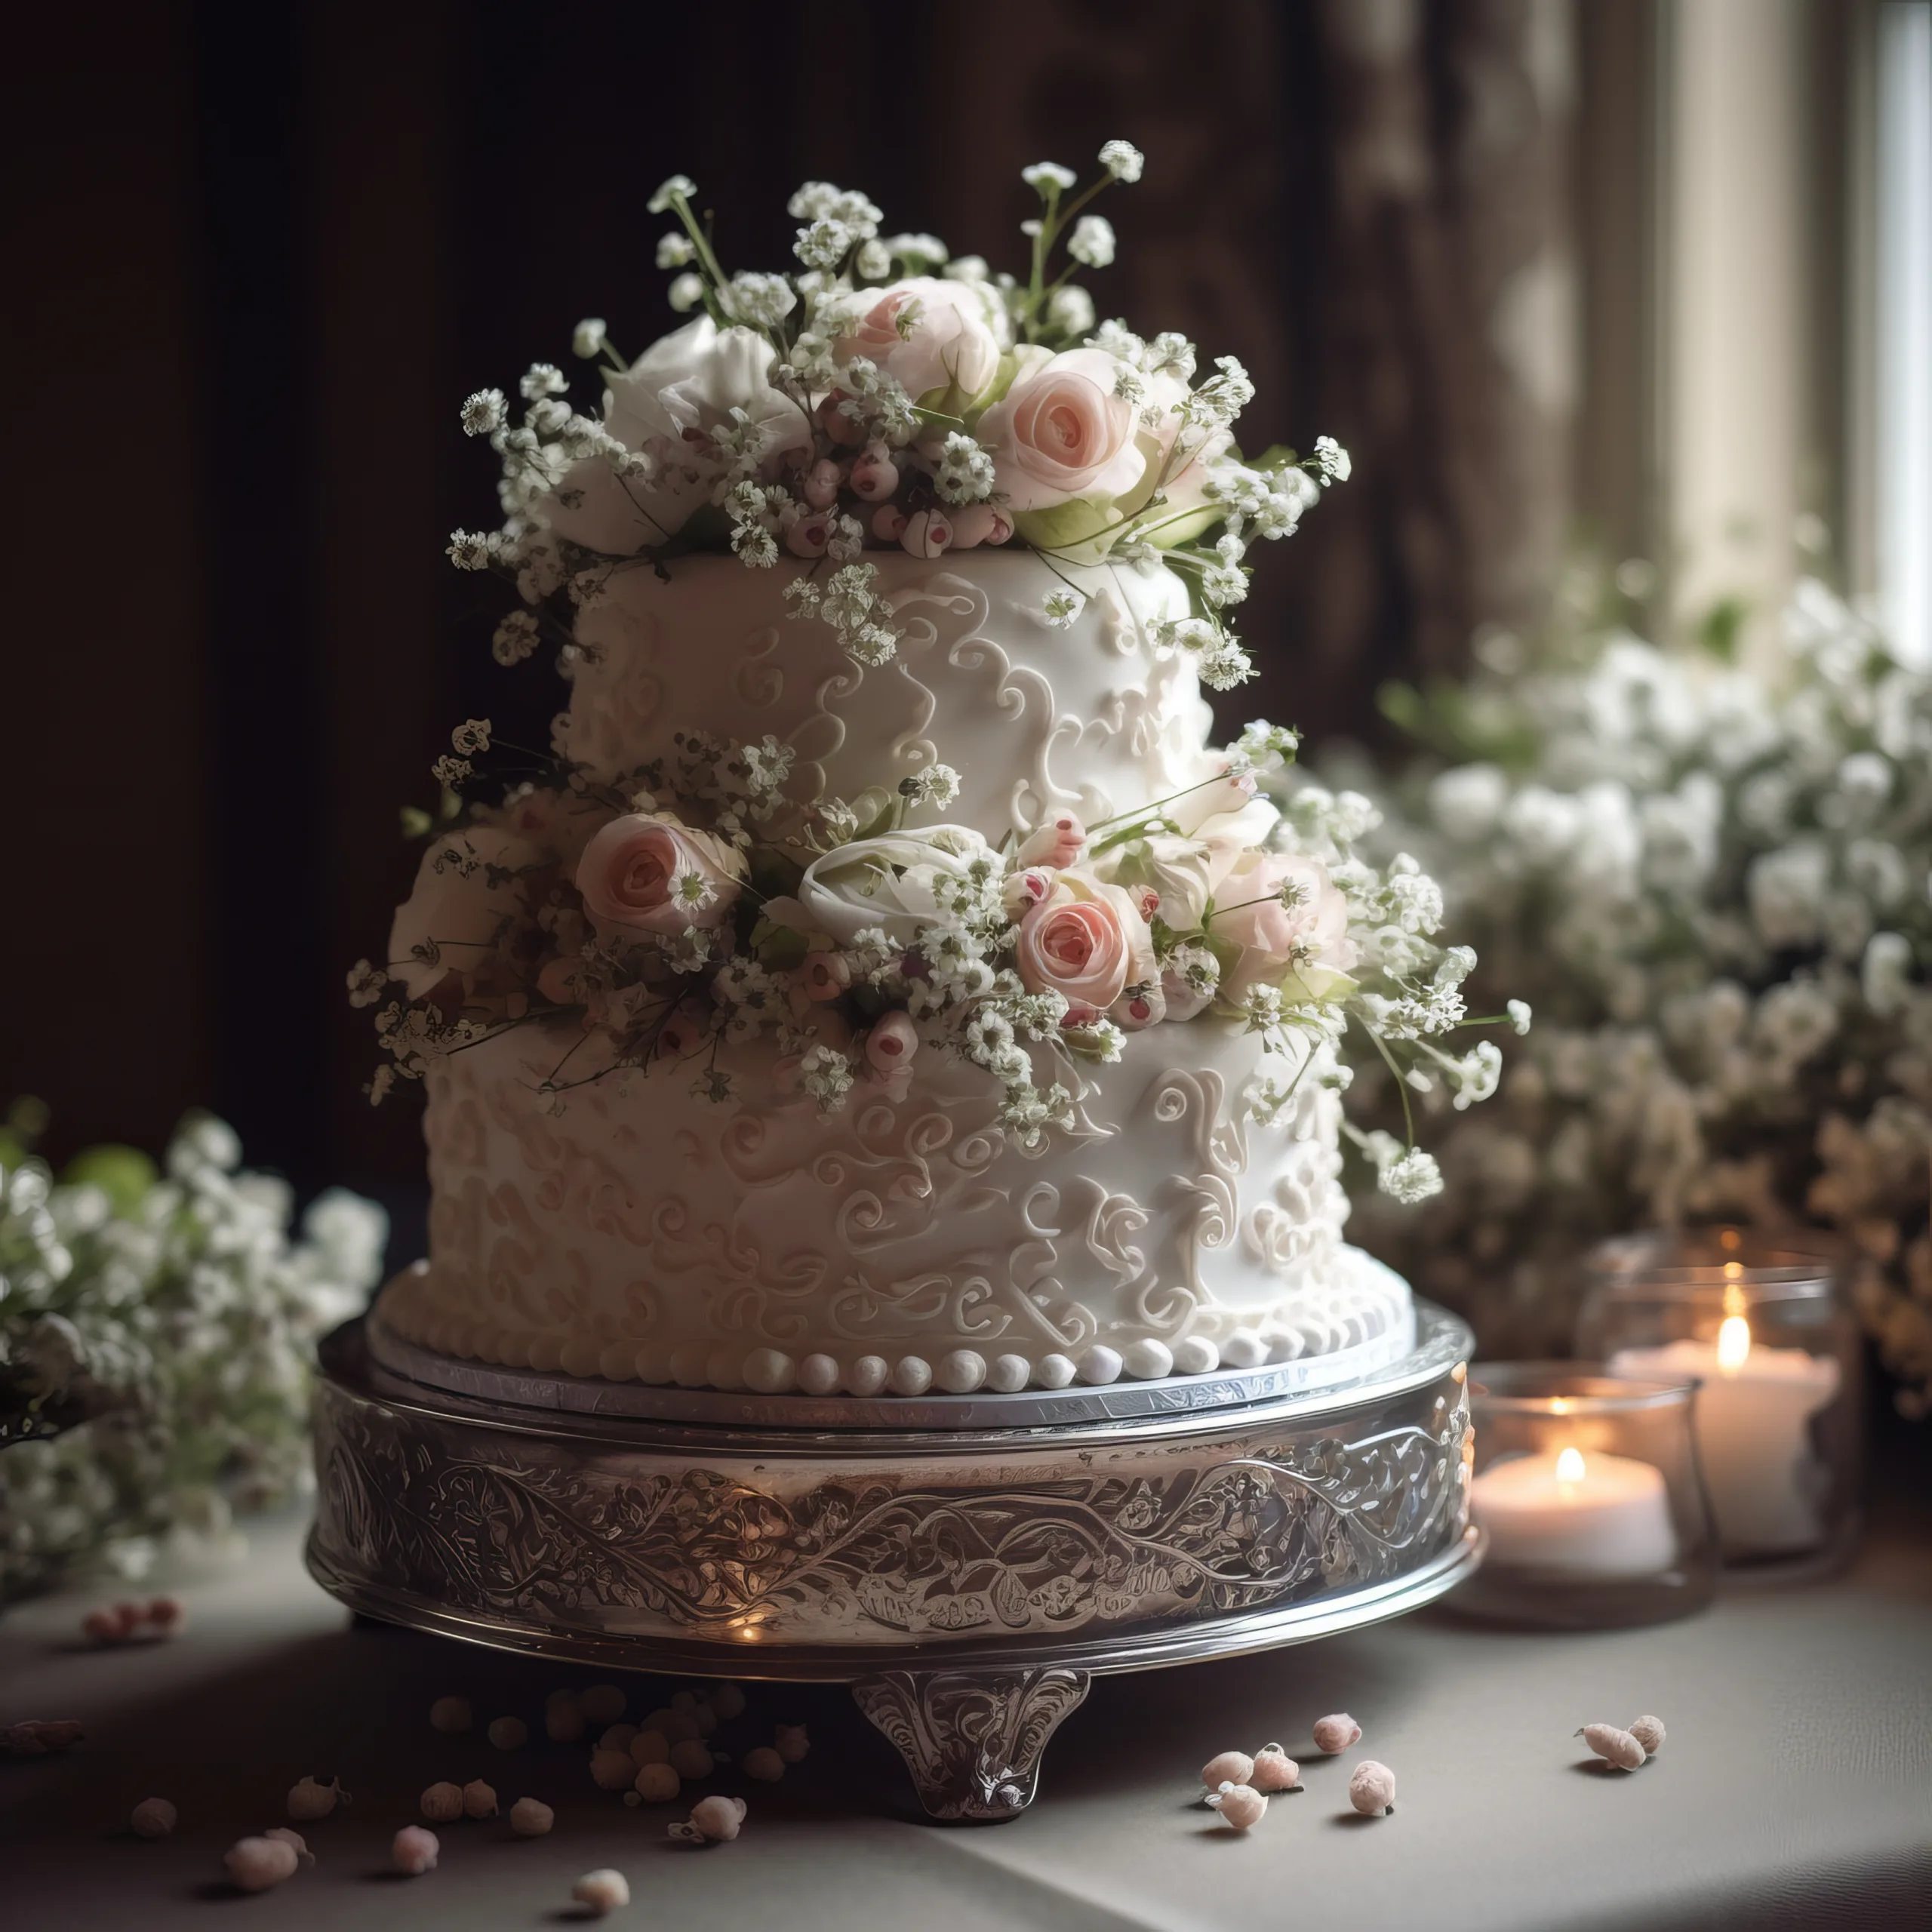 50 tips on the art of Photography: Wedding Cake with Floral Accents.